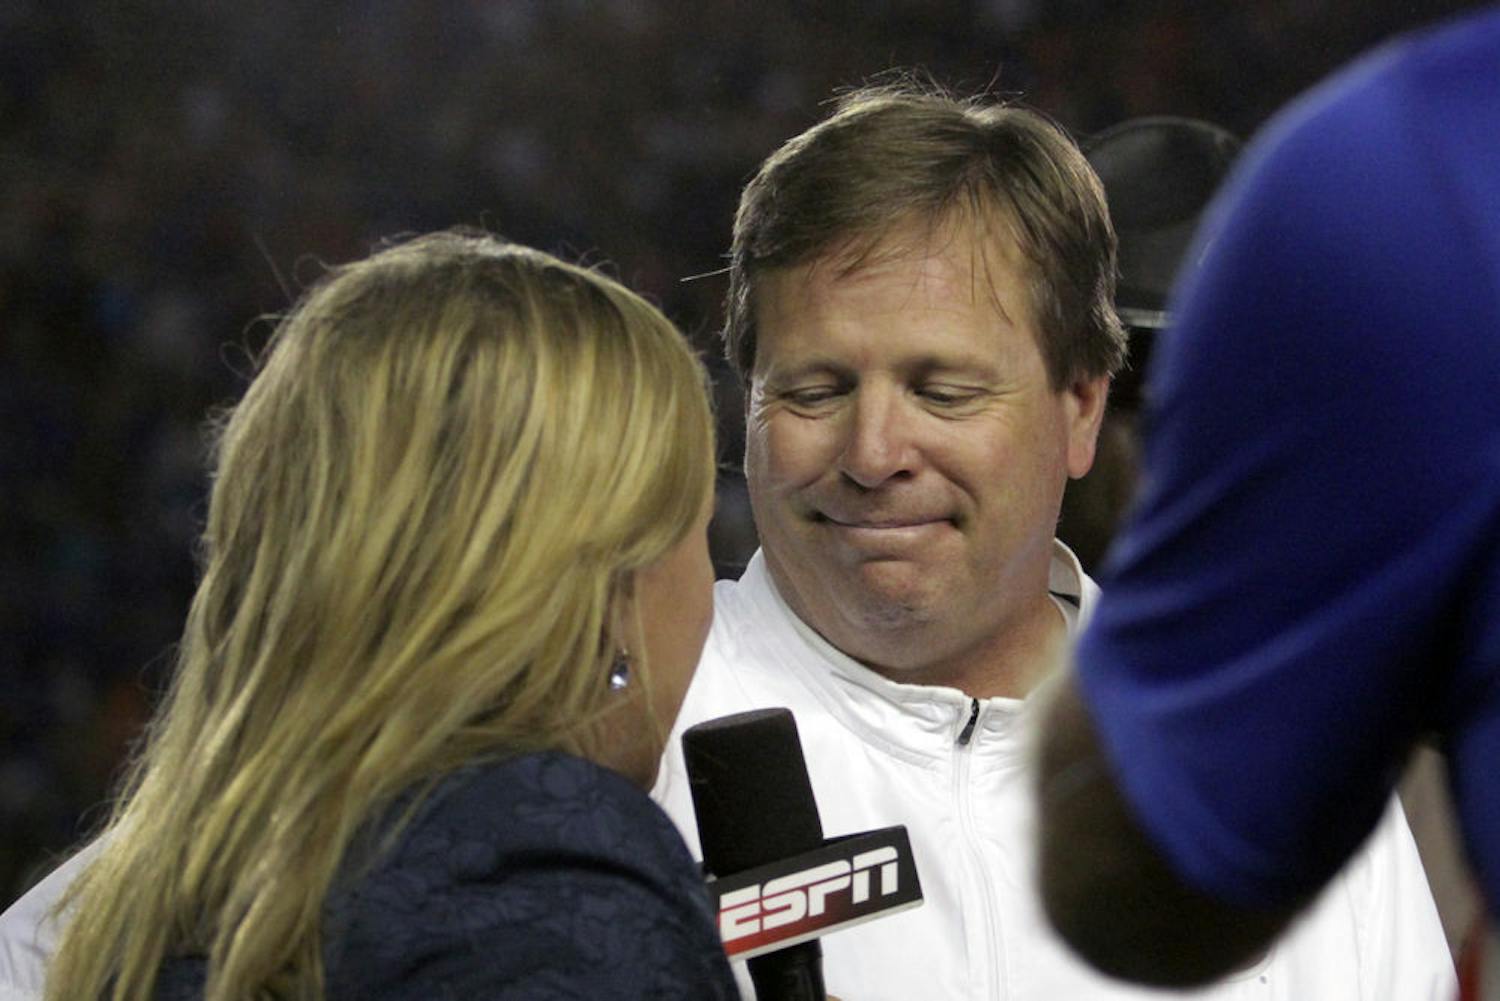 UF coach Jim McElwain speaks to ESPN's Holly Rowe following Florida's 38-10 win against Ole Miss on Sept. 3, 2015, at Ben Hill Griffin Stadium.